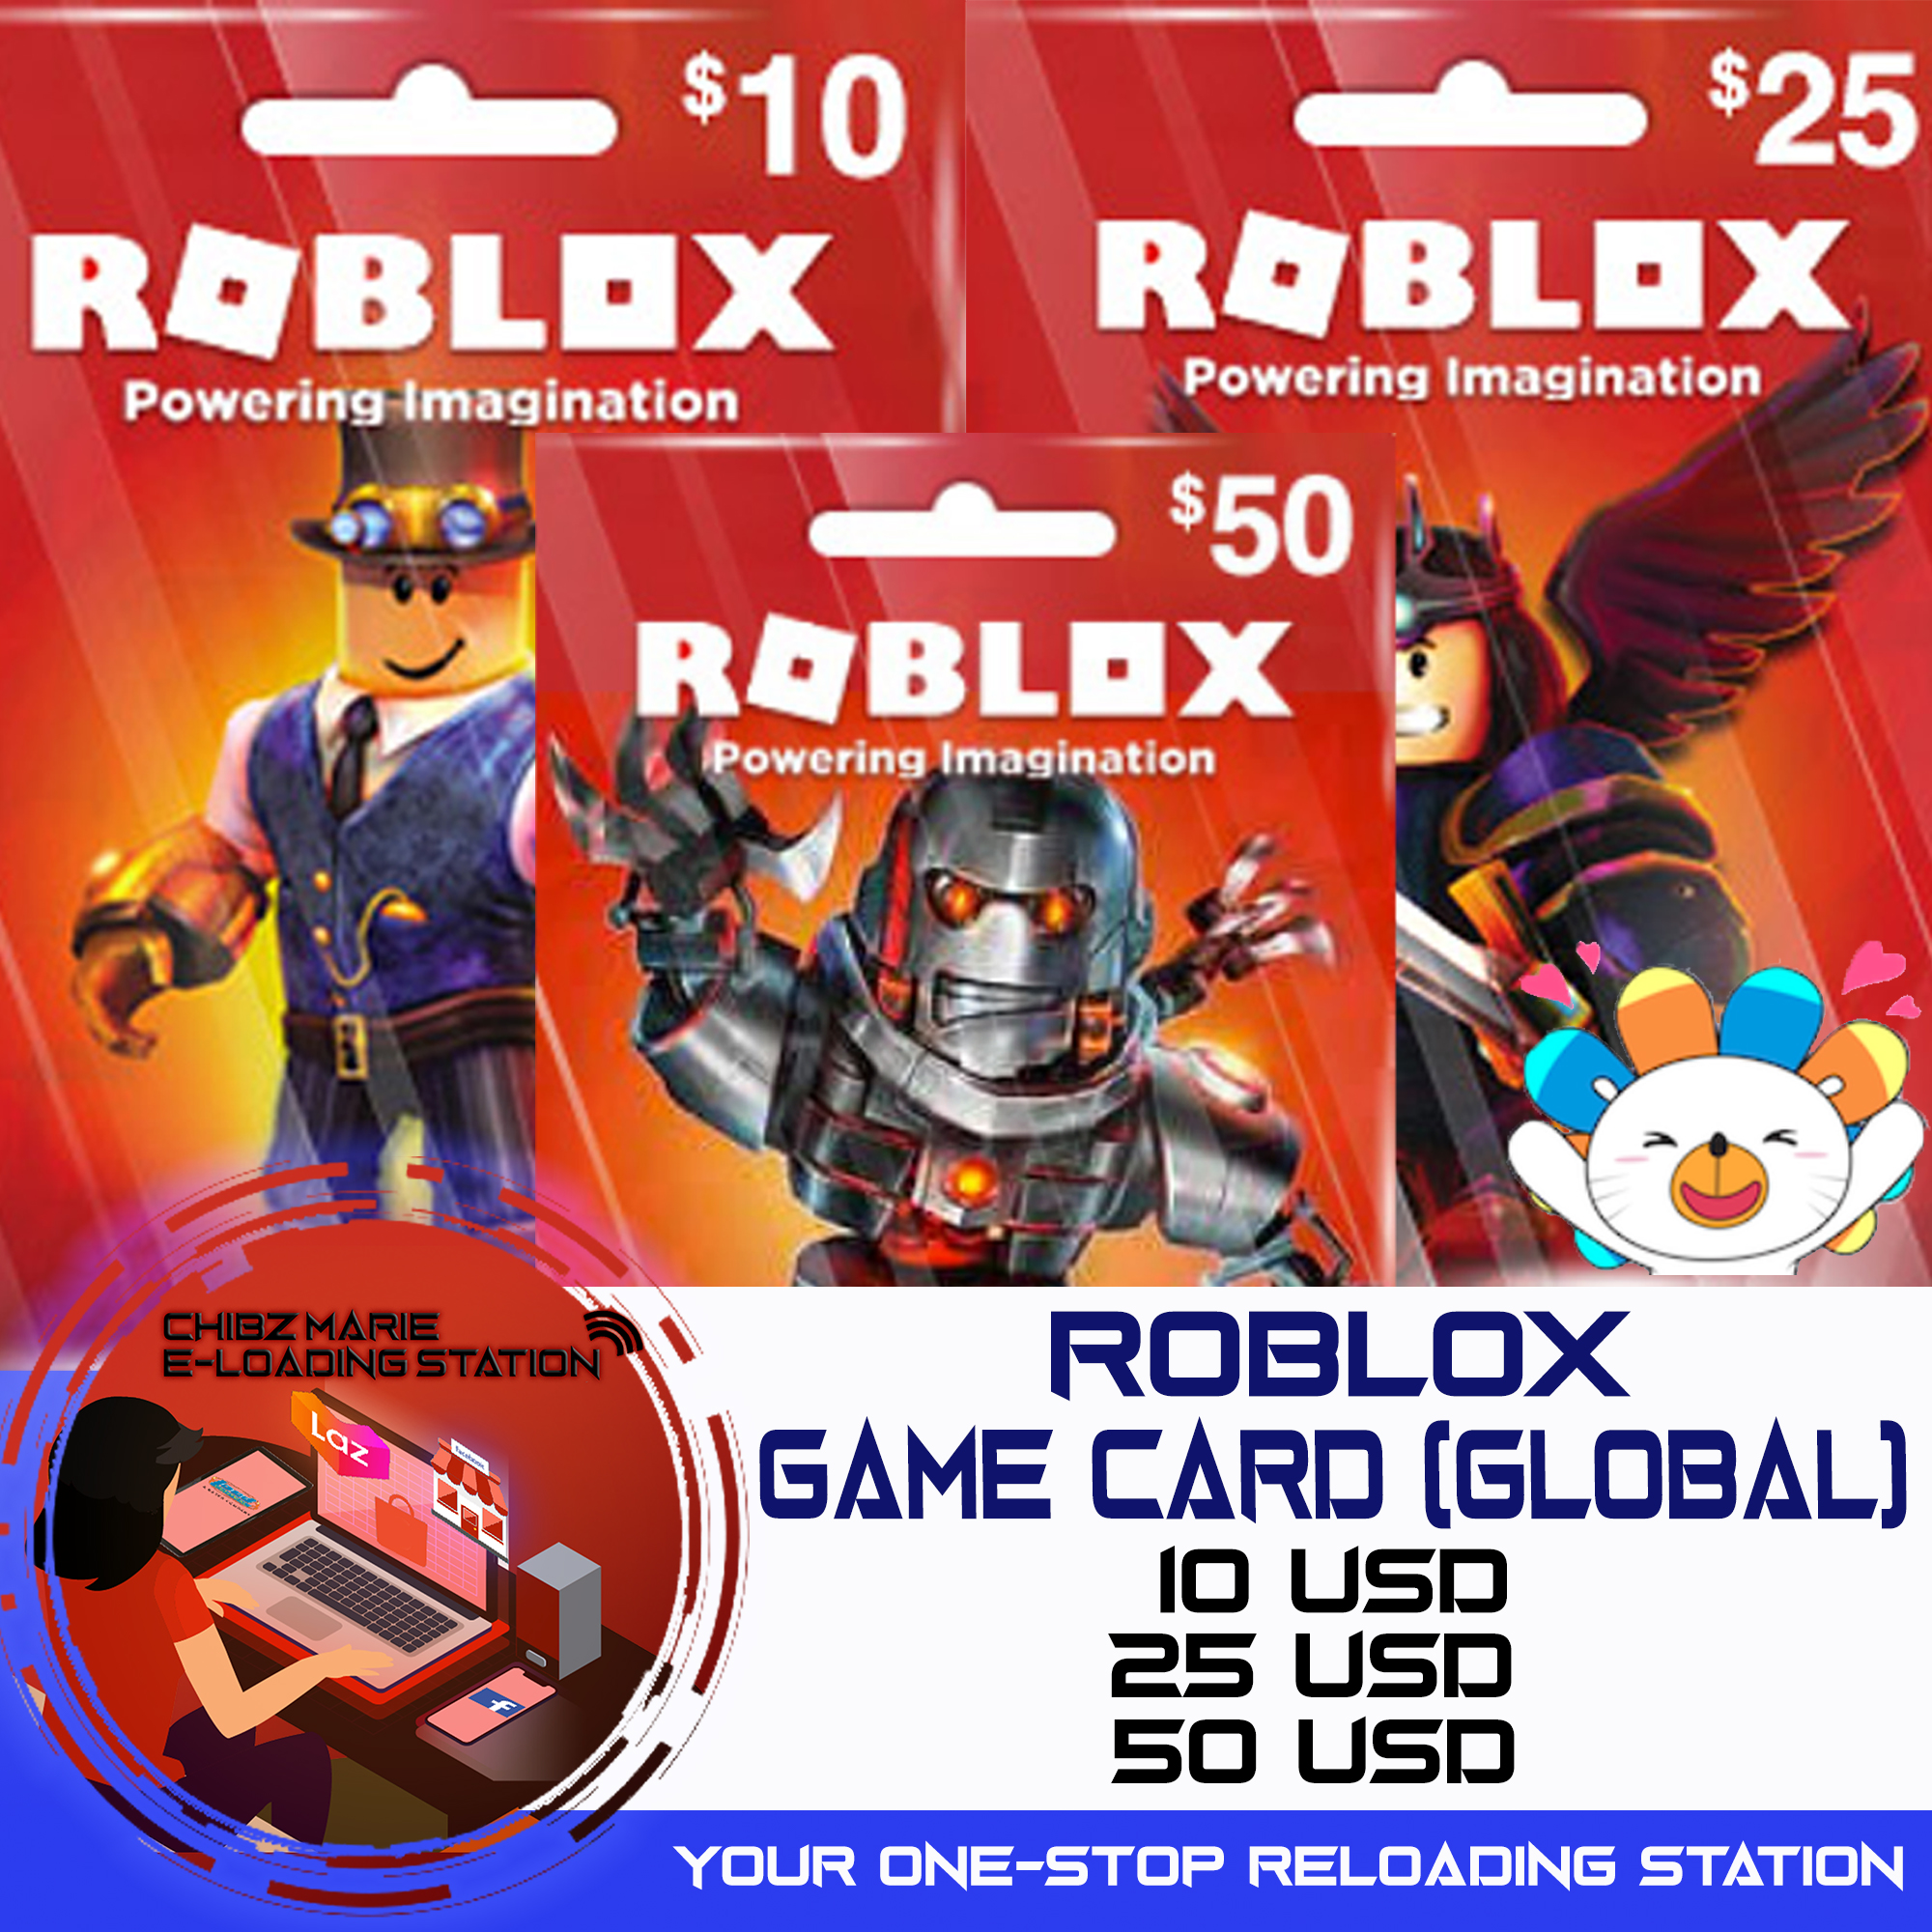 Robux Roblox Gift Card Game Card Global Us 10 25 50 Chibzmarie Lazada Ph - customer service roblox game cards